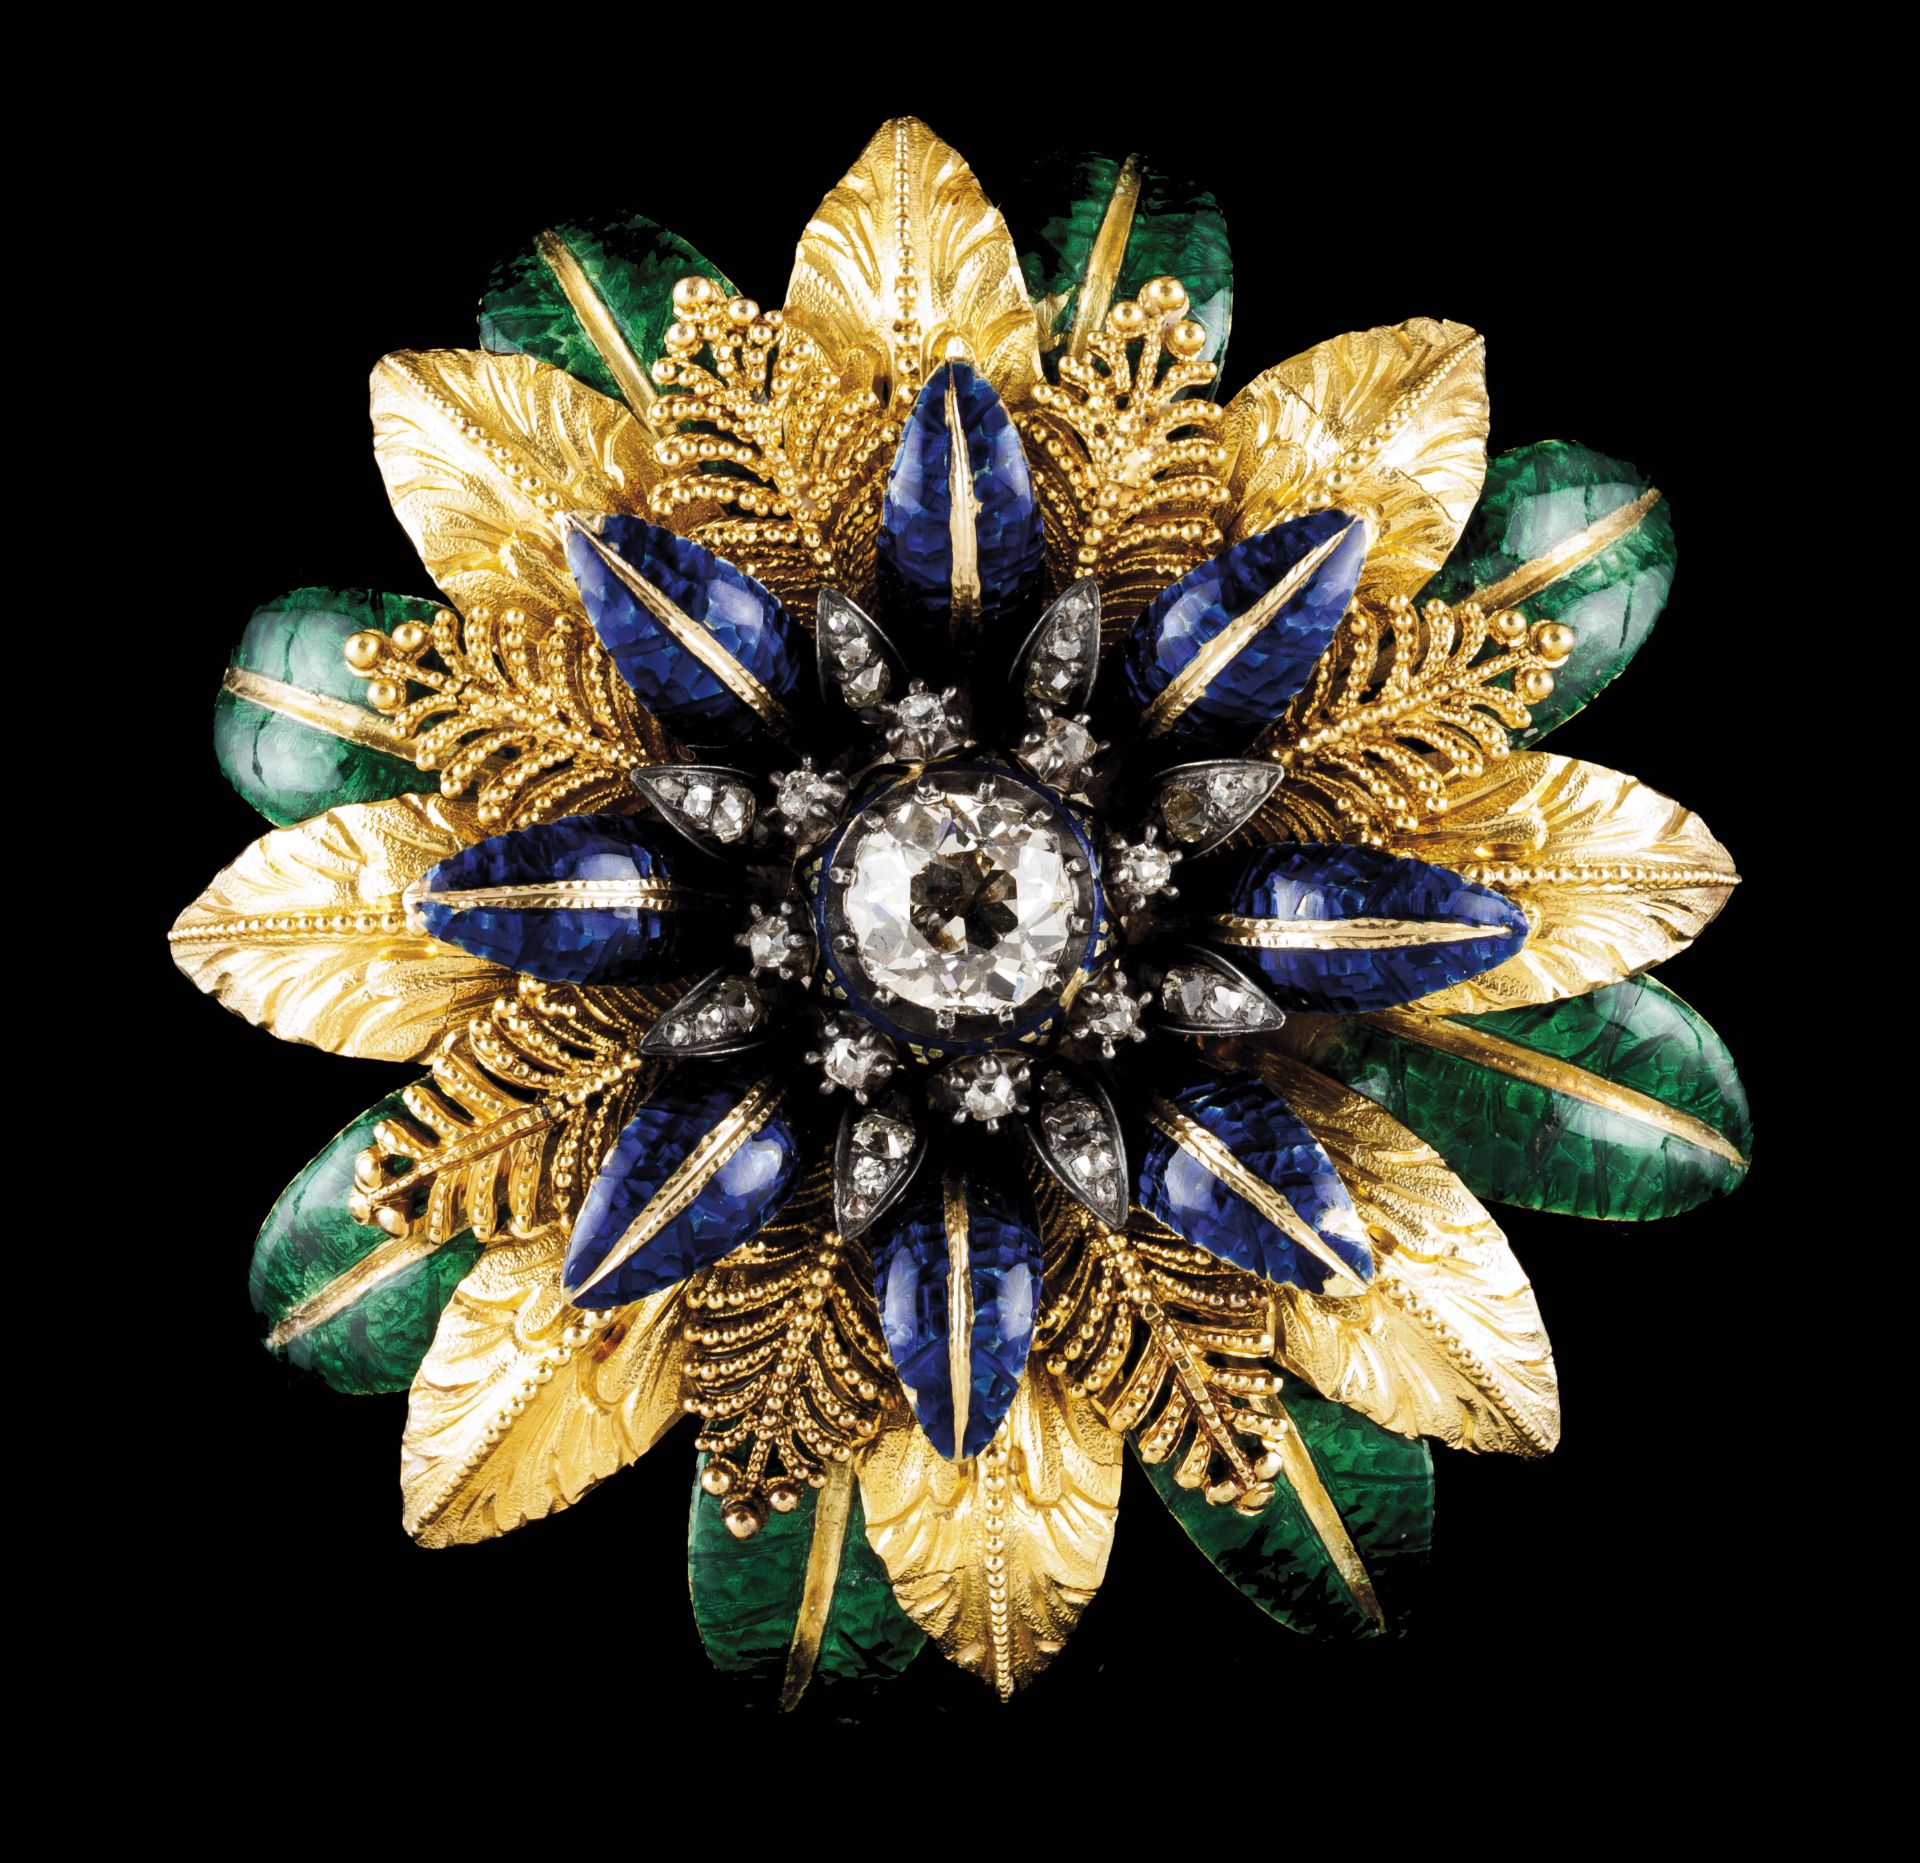 A large broochGold Flower made of 4 layers of blue and green enamelled leaves Central antique cut